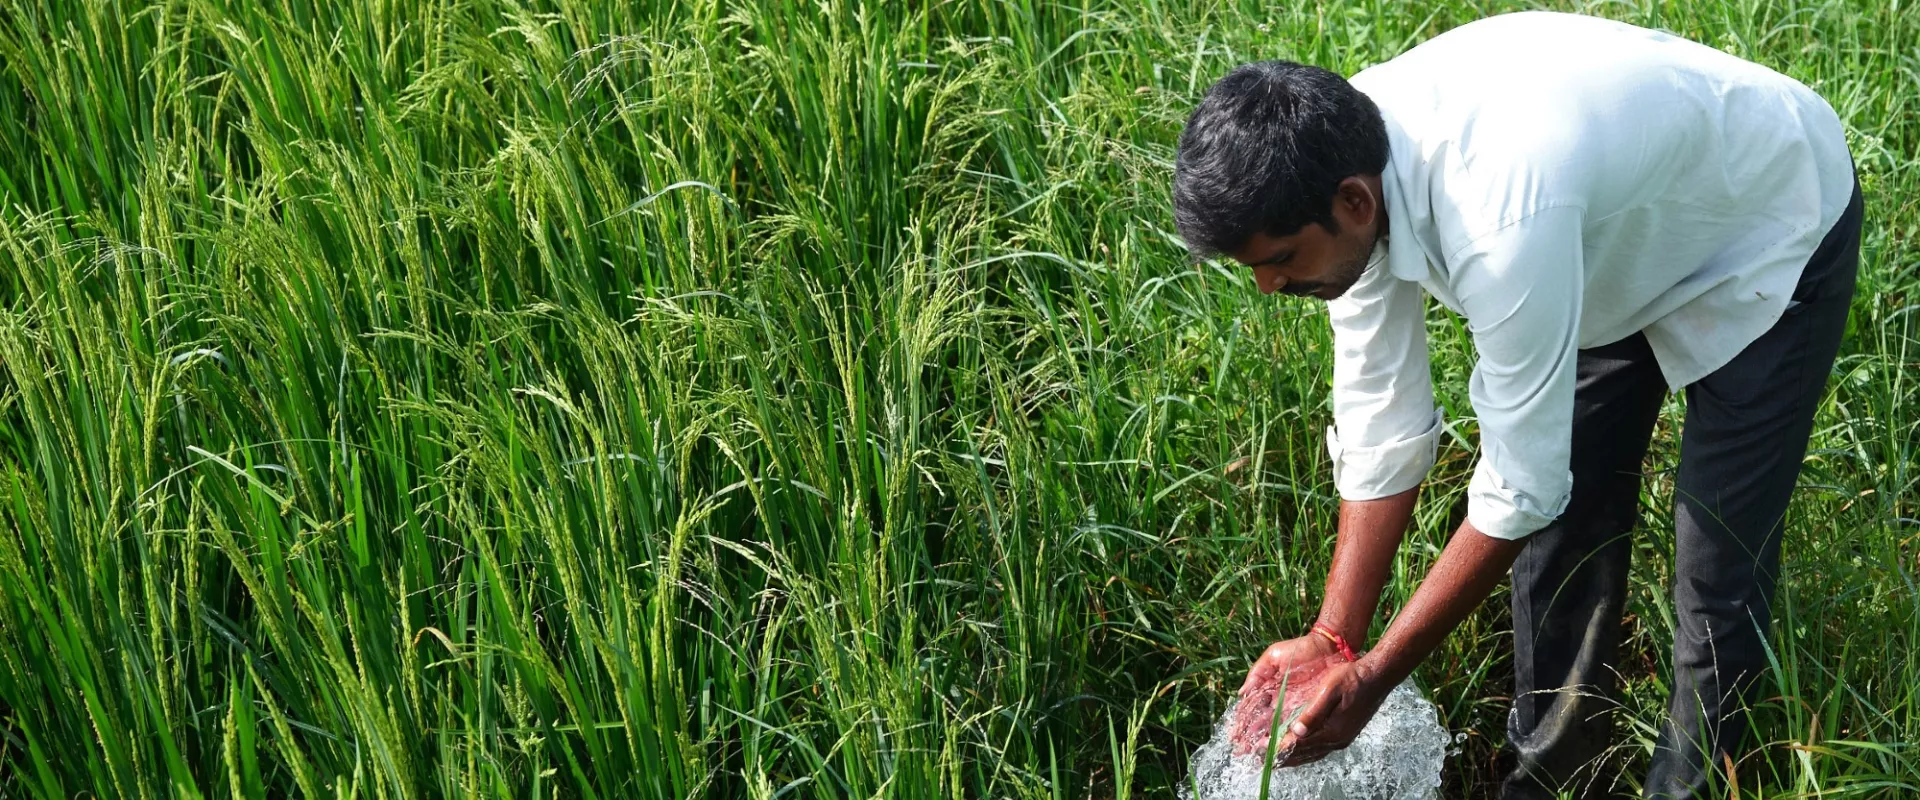 K Malesh, a farmer in the village of Sollakpally, now has ready access to water to irrigate his crops.